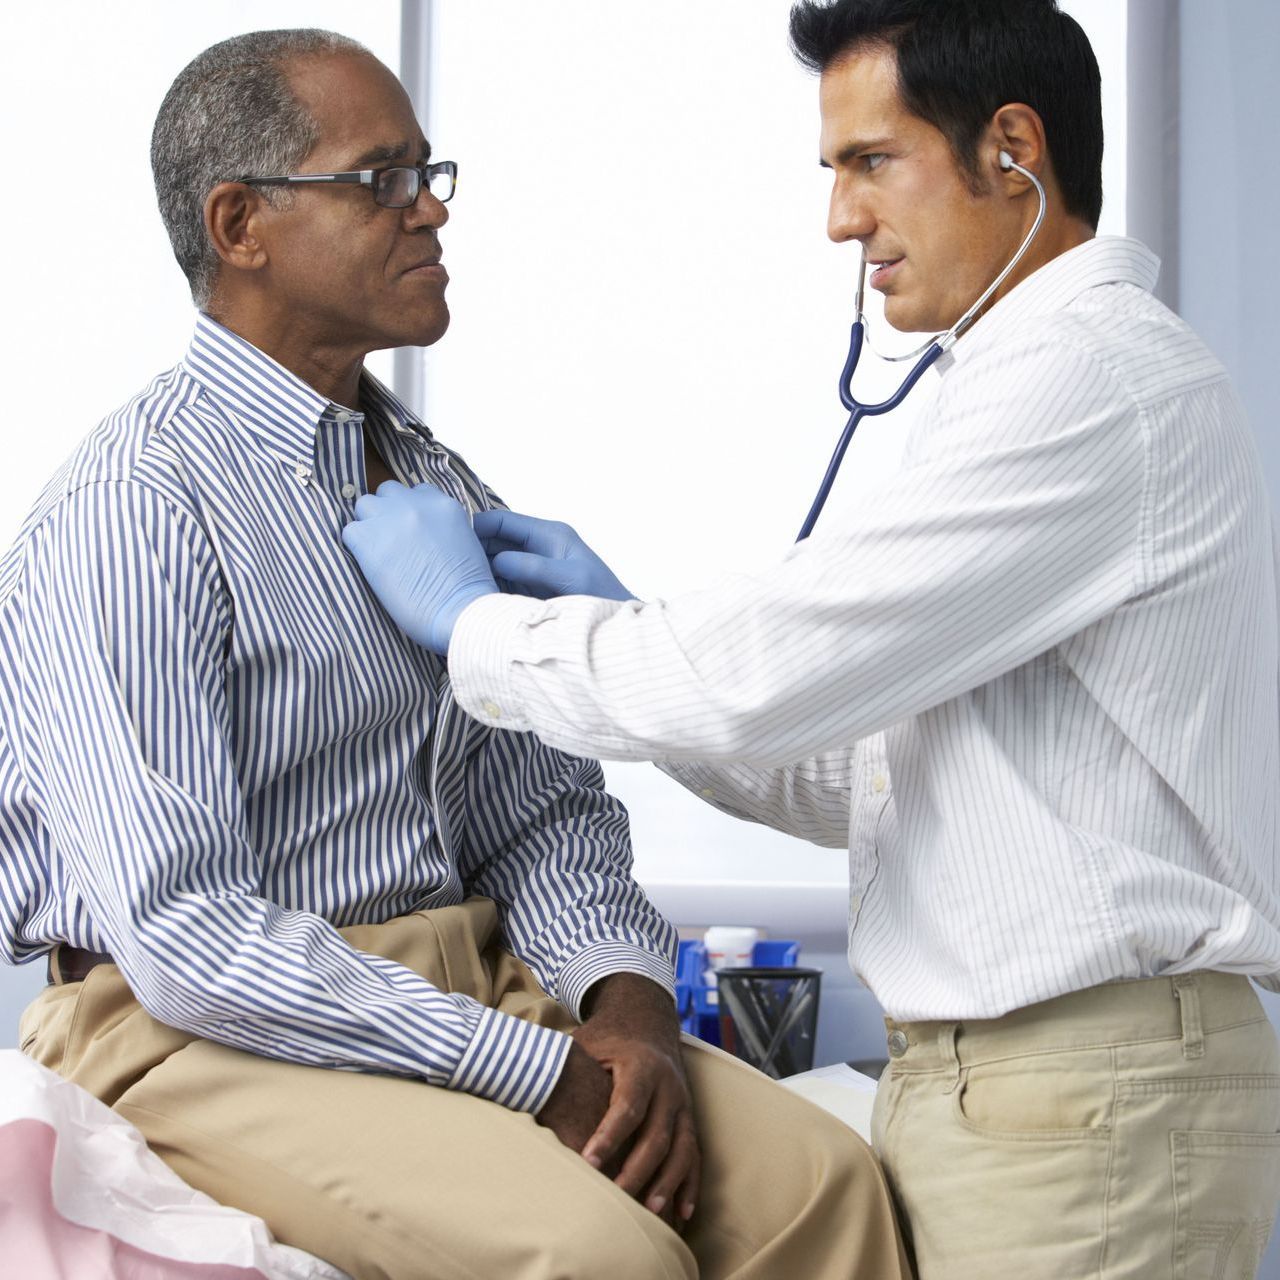 A doctor is listening to a patient 's chest with a stethoscope.